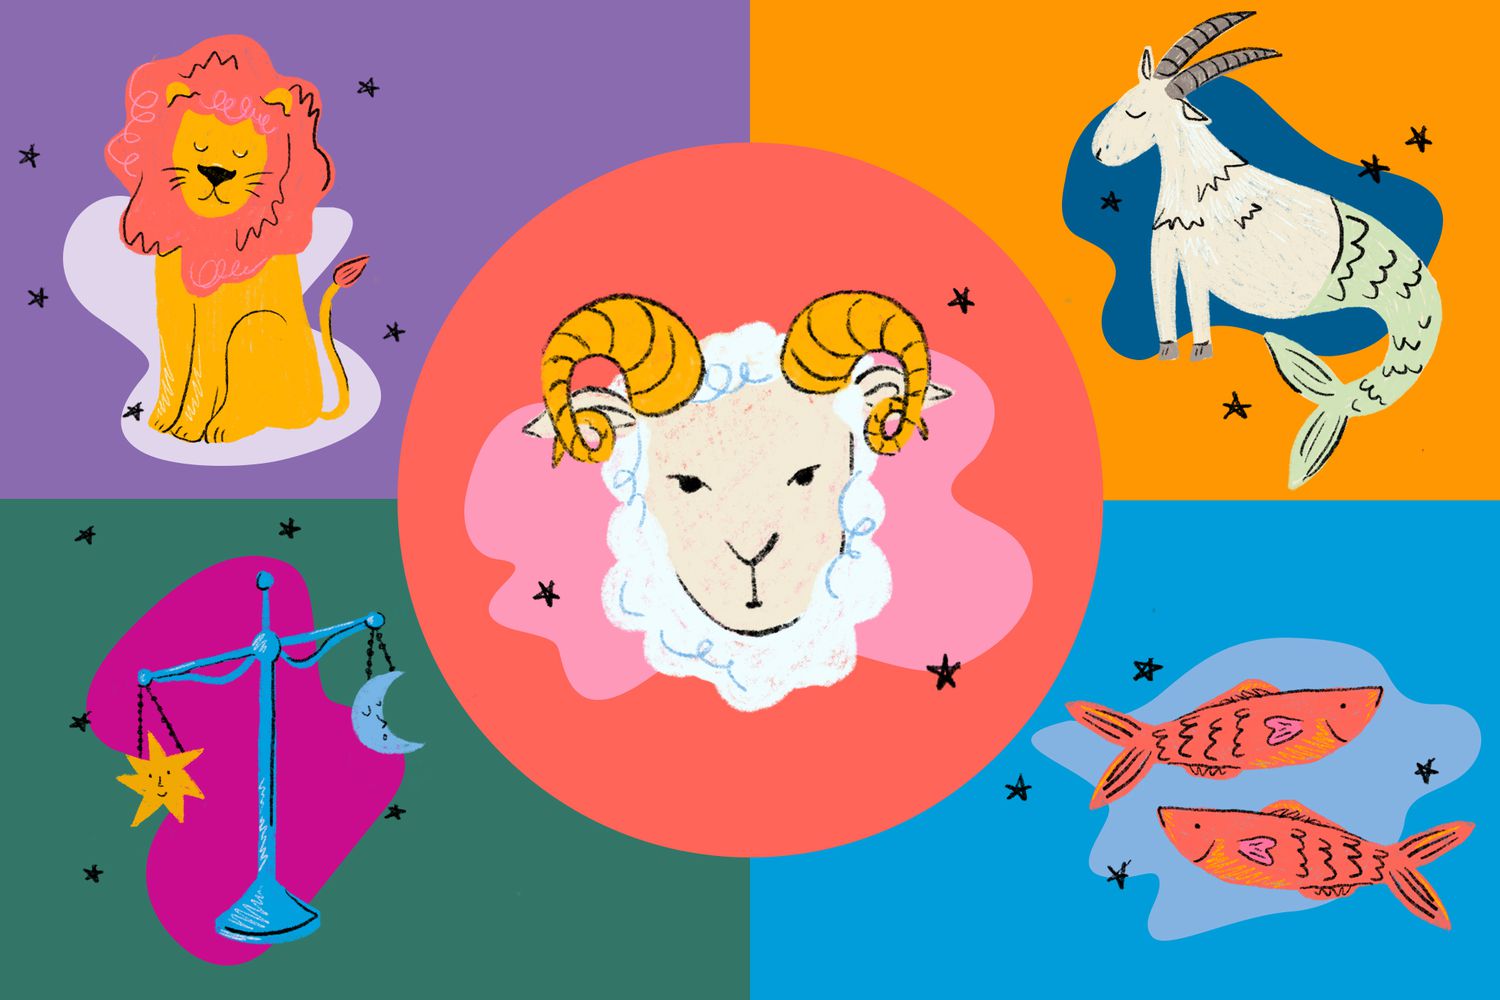 New Year's Rituals for Each Zodiac Sign